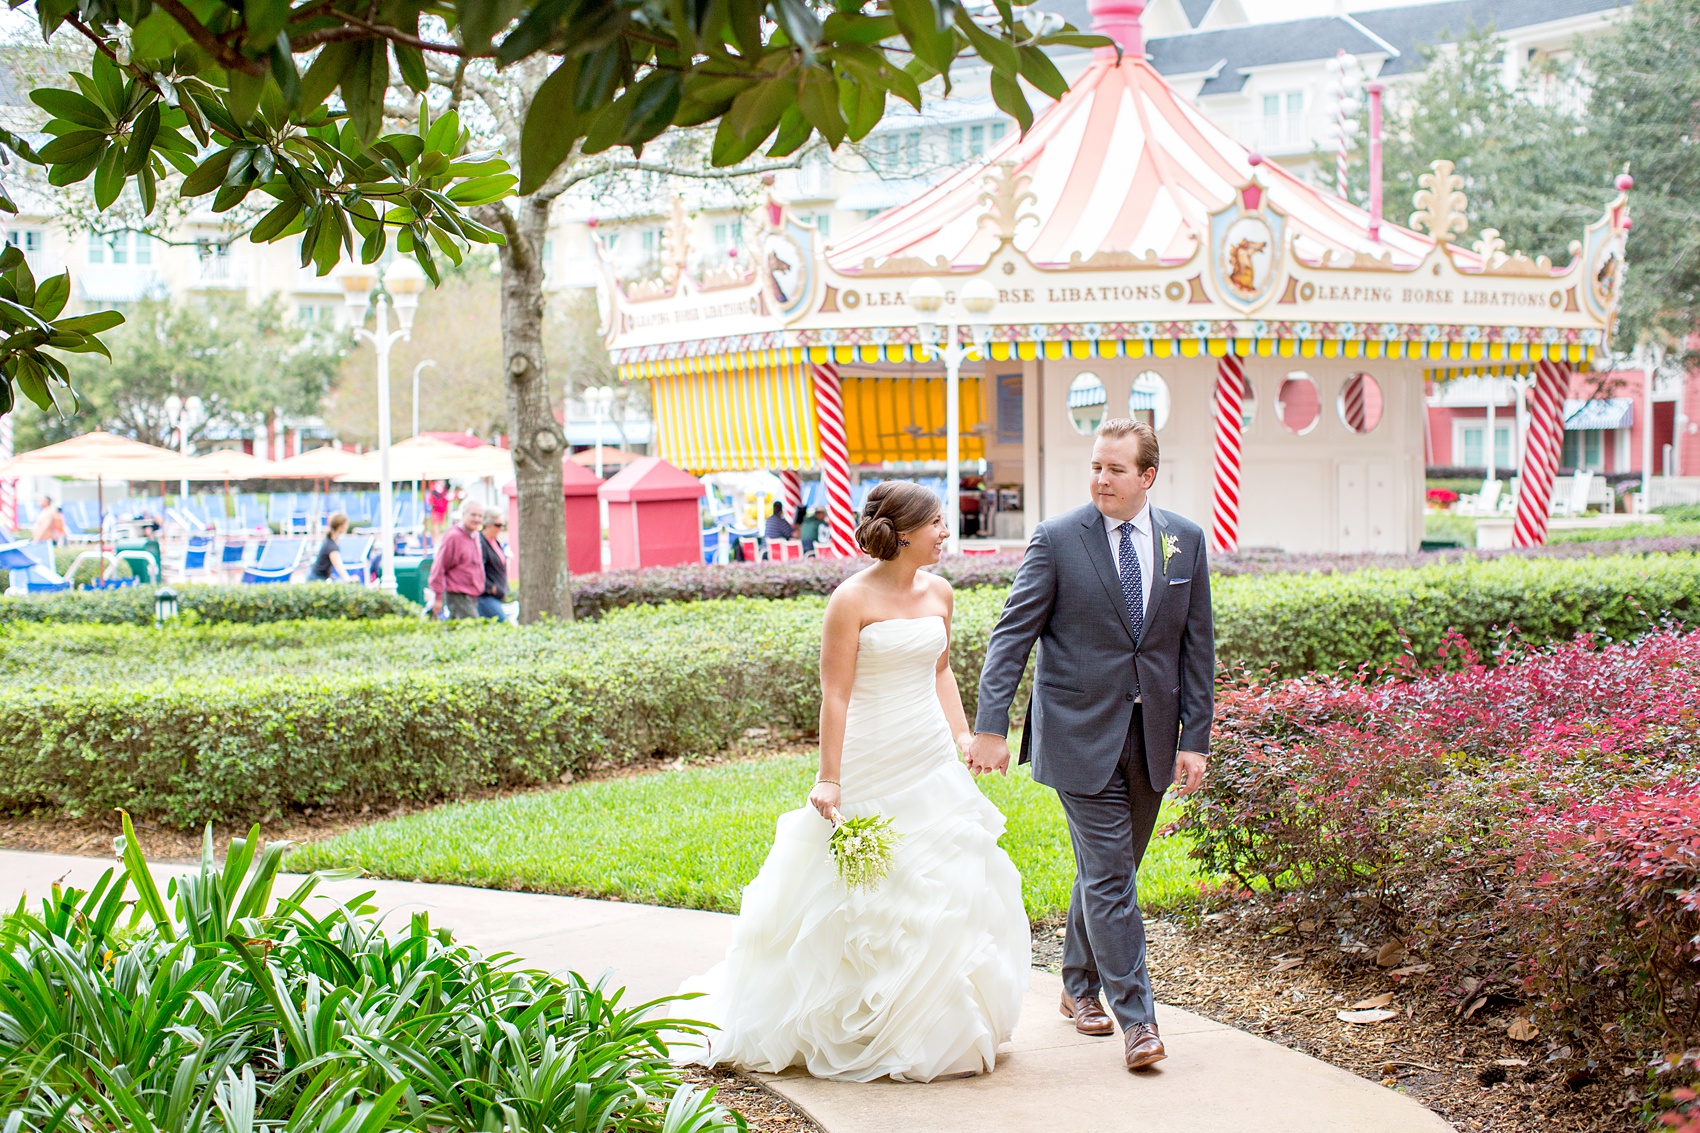 Walt Disney World wedding pictures at the Boardwalk venue, including a waterfront ceremony and Dance Hall reception near Epcot. These photos will give you unique, fun ideas from Glow in the Dark invitations to their Dole Whip flavored cake! Want to see more? Click through to Mikkel Paige Photography for more inspiration from this bride and groom's colorful day! #DisneyWedding #mikkelpaige #disneysboardwalk #DisneyWeddingVenue #DisneyBride #DisneyFan #MickeyEars